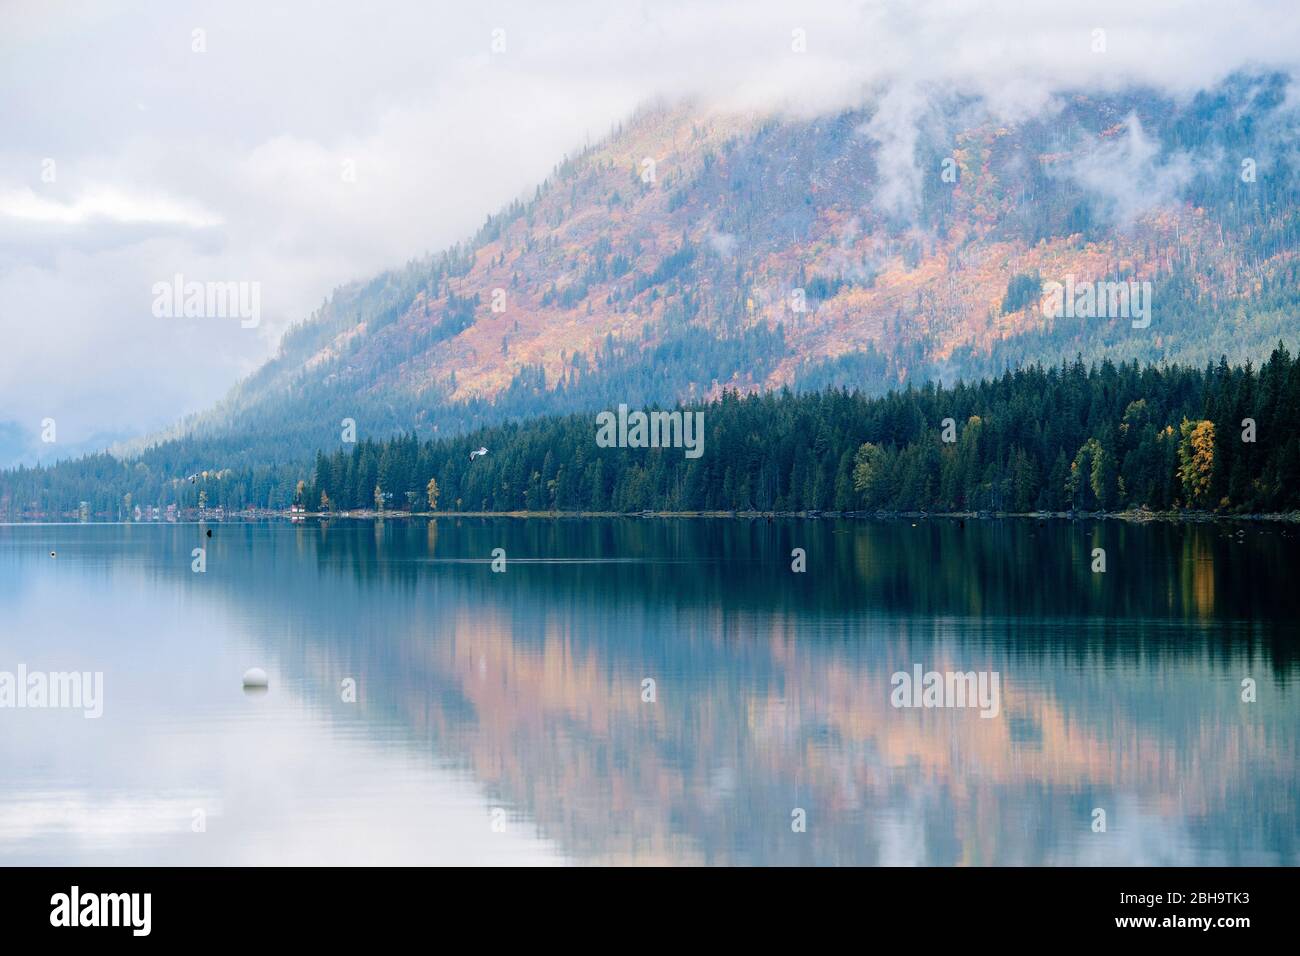 View of mountain and forest reflected in lake in overcast, Lake Wenatchee State Park, Wenatchee, Washington, USA Stock Photo